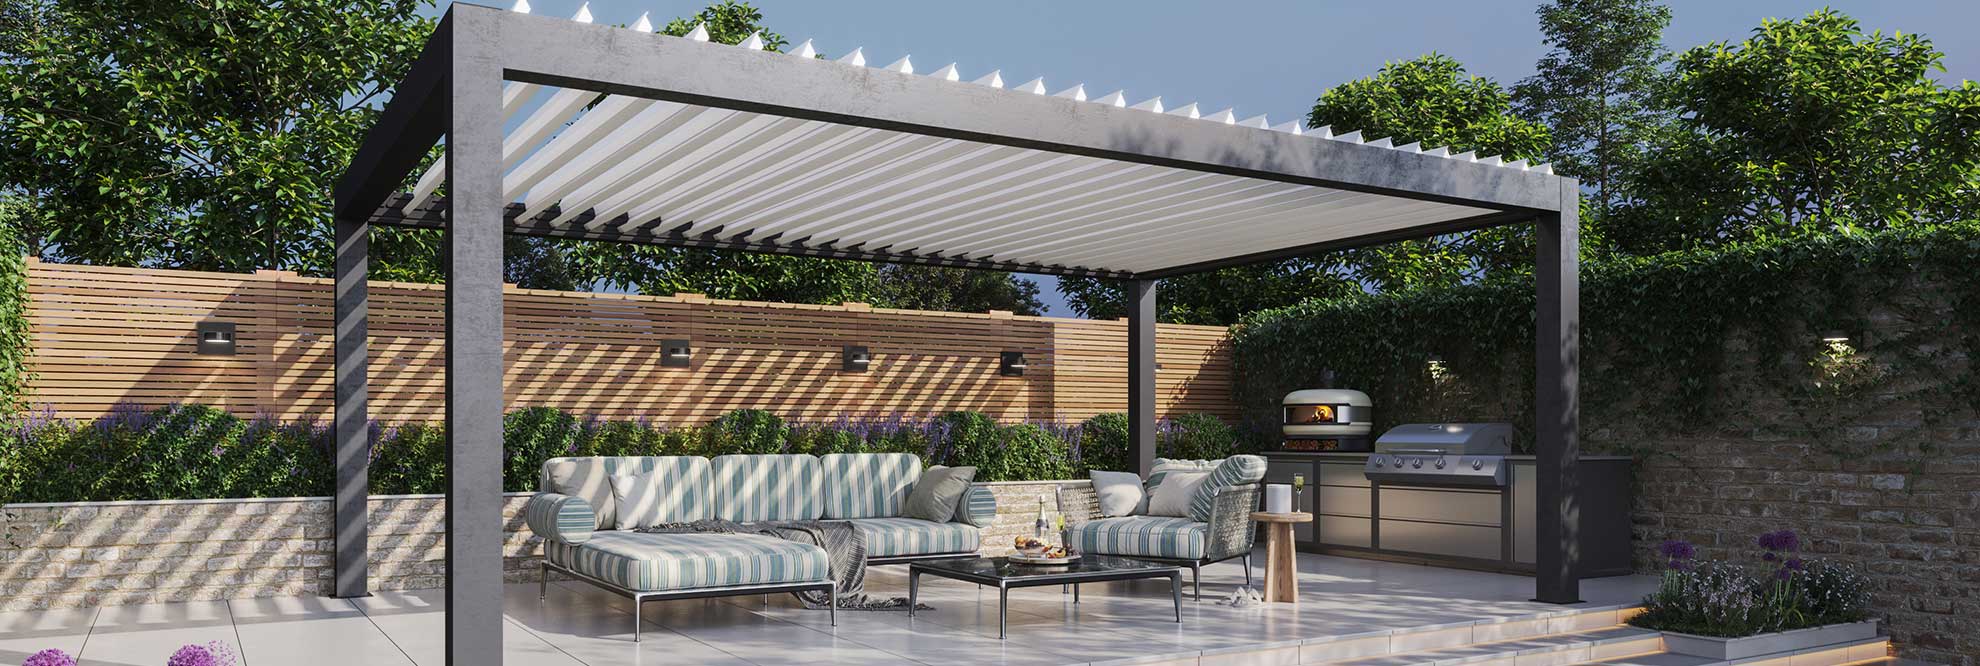 A modern pergola providing shade to outdoor furniture on a sunny day 